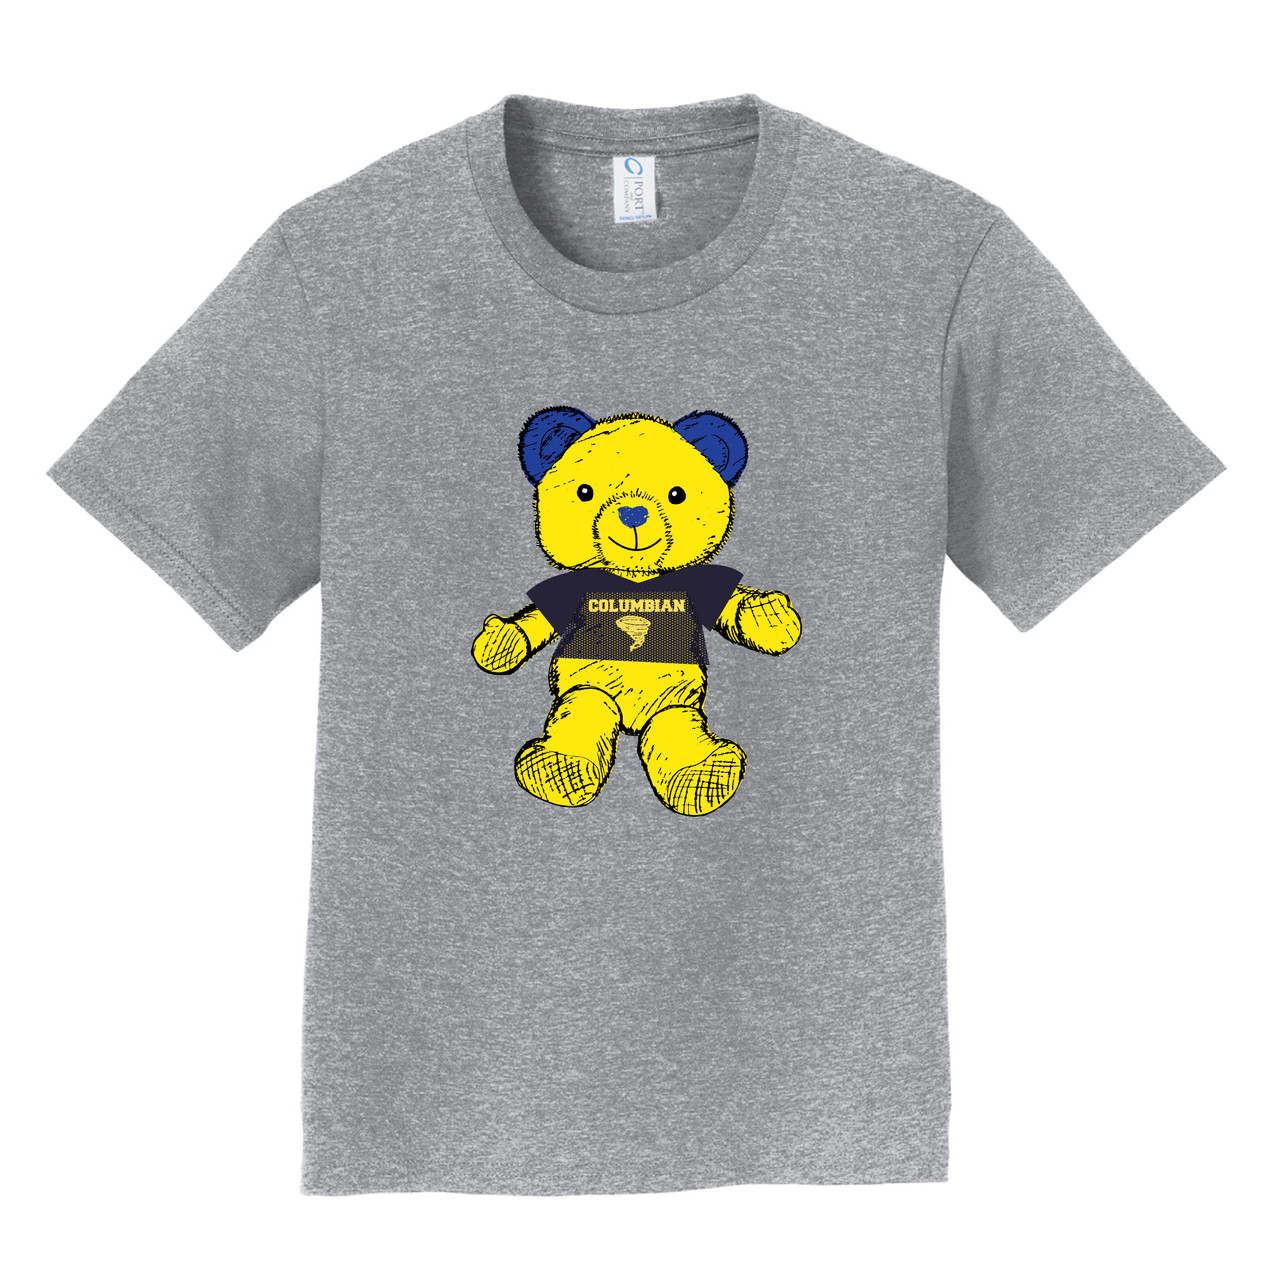 Teddy Special Round Neck T-shirt For Kids